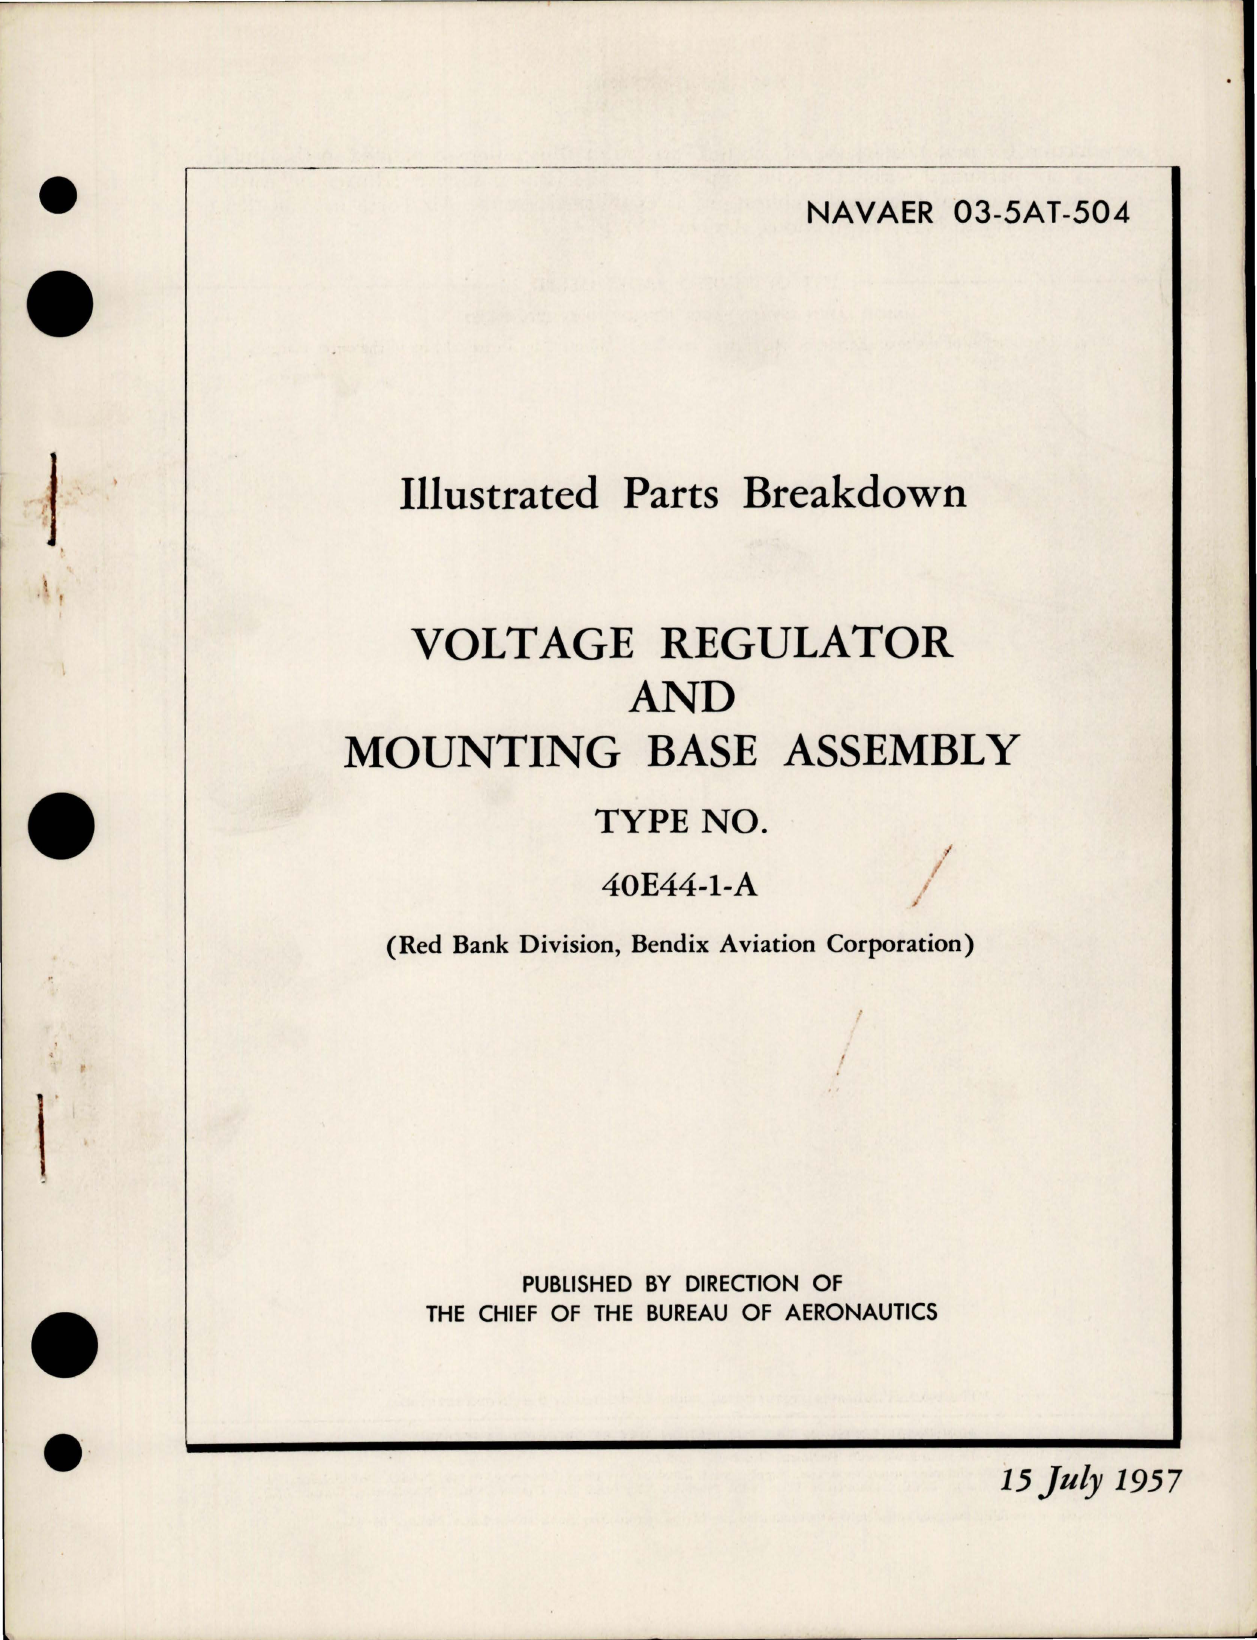 Sample page 1 from AirCorps Library document: Illustrated Parts Breakdown for Voltage Regulator and Mounting Base Assembly - Type - 40E44-1-A